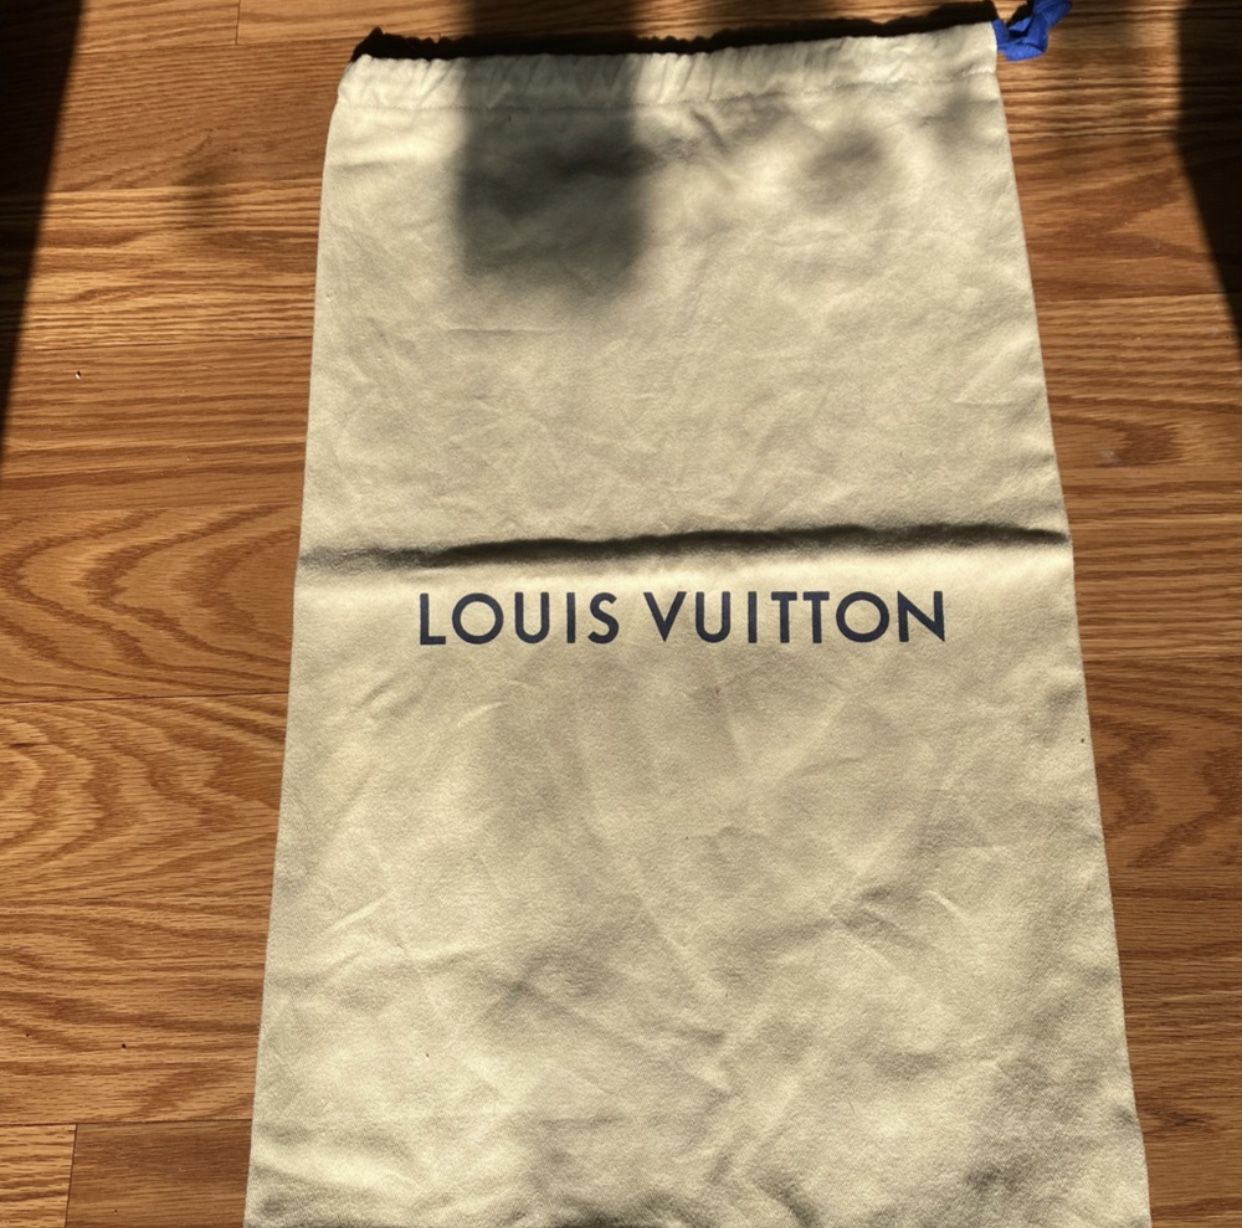 Louis Vuitton Dust Bag for Sale in Boston, MA - OfferUp